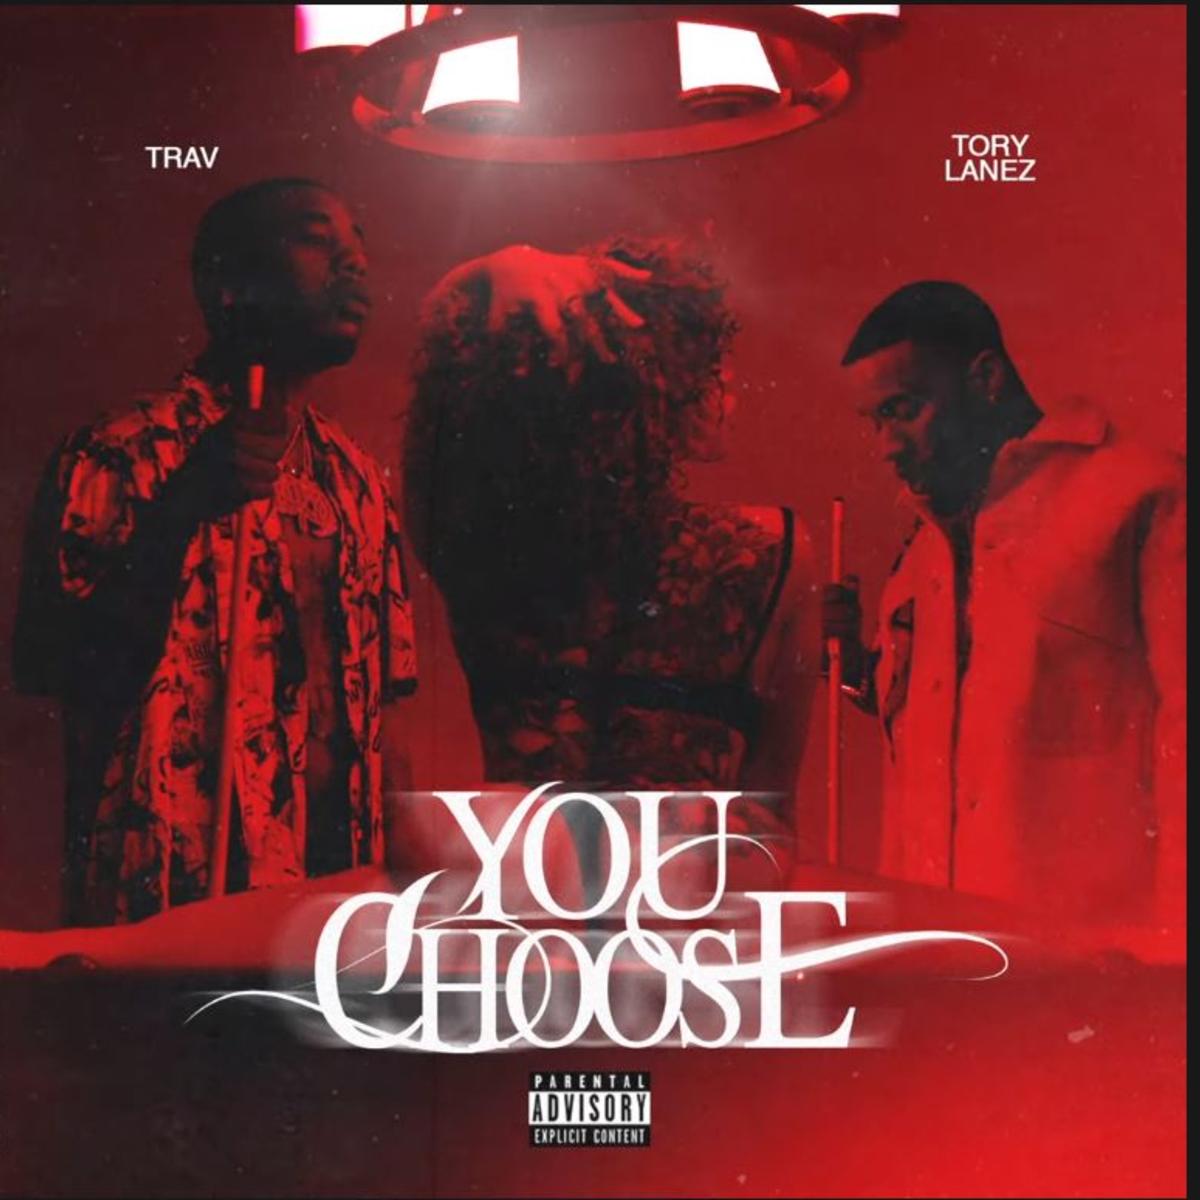 Trav & Tory Lanez Join Forces For “You Choose”